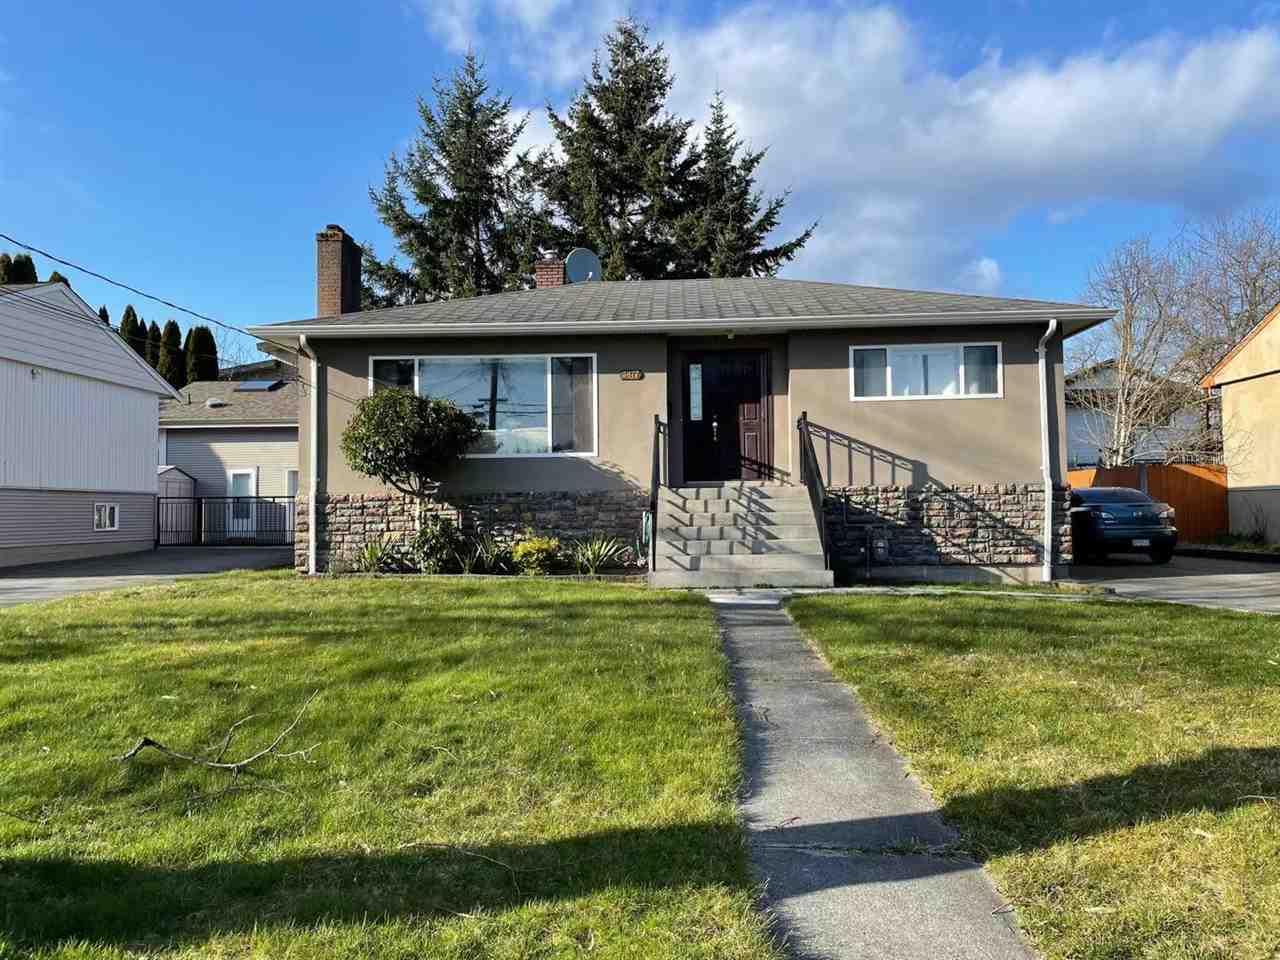 3877 HERTFORD STREET, Burnaby, British Columbia, Canada V5G2R5, 3 Bedrooms Bedrooms, Register to View ,3 BathroomsBathrooms,House,For Sale,HERTFORD,R2585015